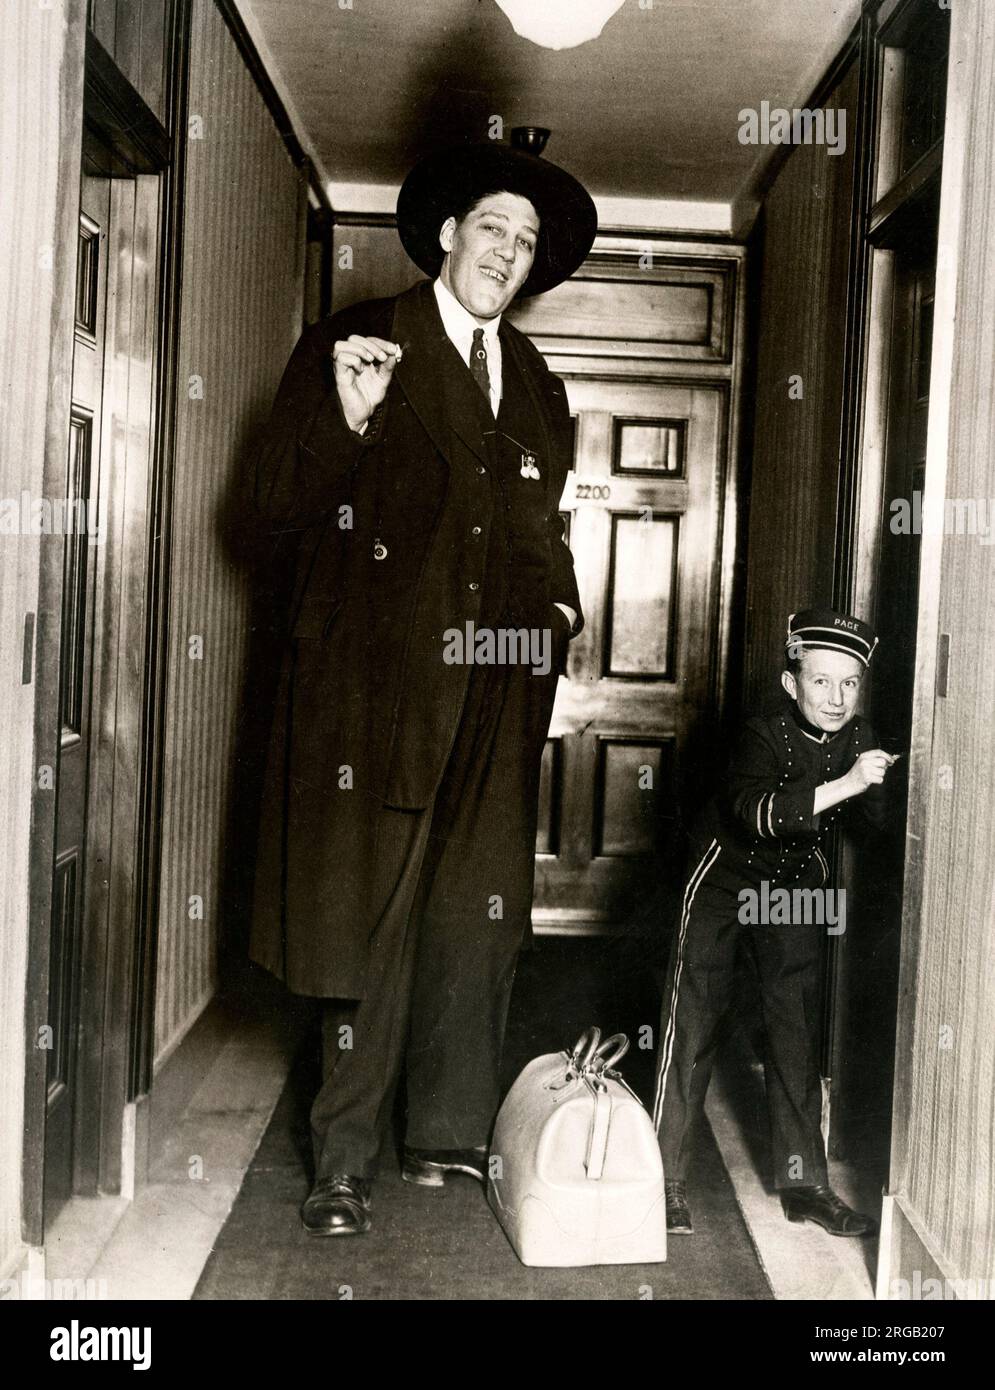 Early 20th century vintage press photograph - tall actor John Aasen and dwarf bellhop in New York, 1924. John Aasen (March 5, 1890 - August 1, 1938) was an American silent film actor and sideshow performer who was one of the tallest actors in history. Stock Photo